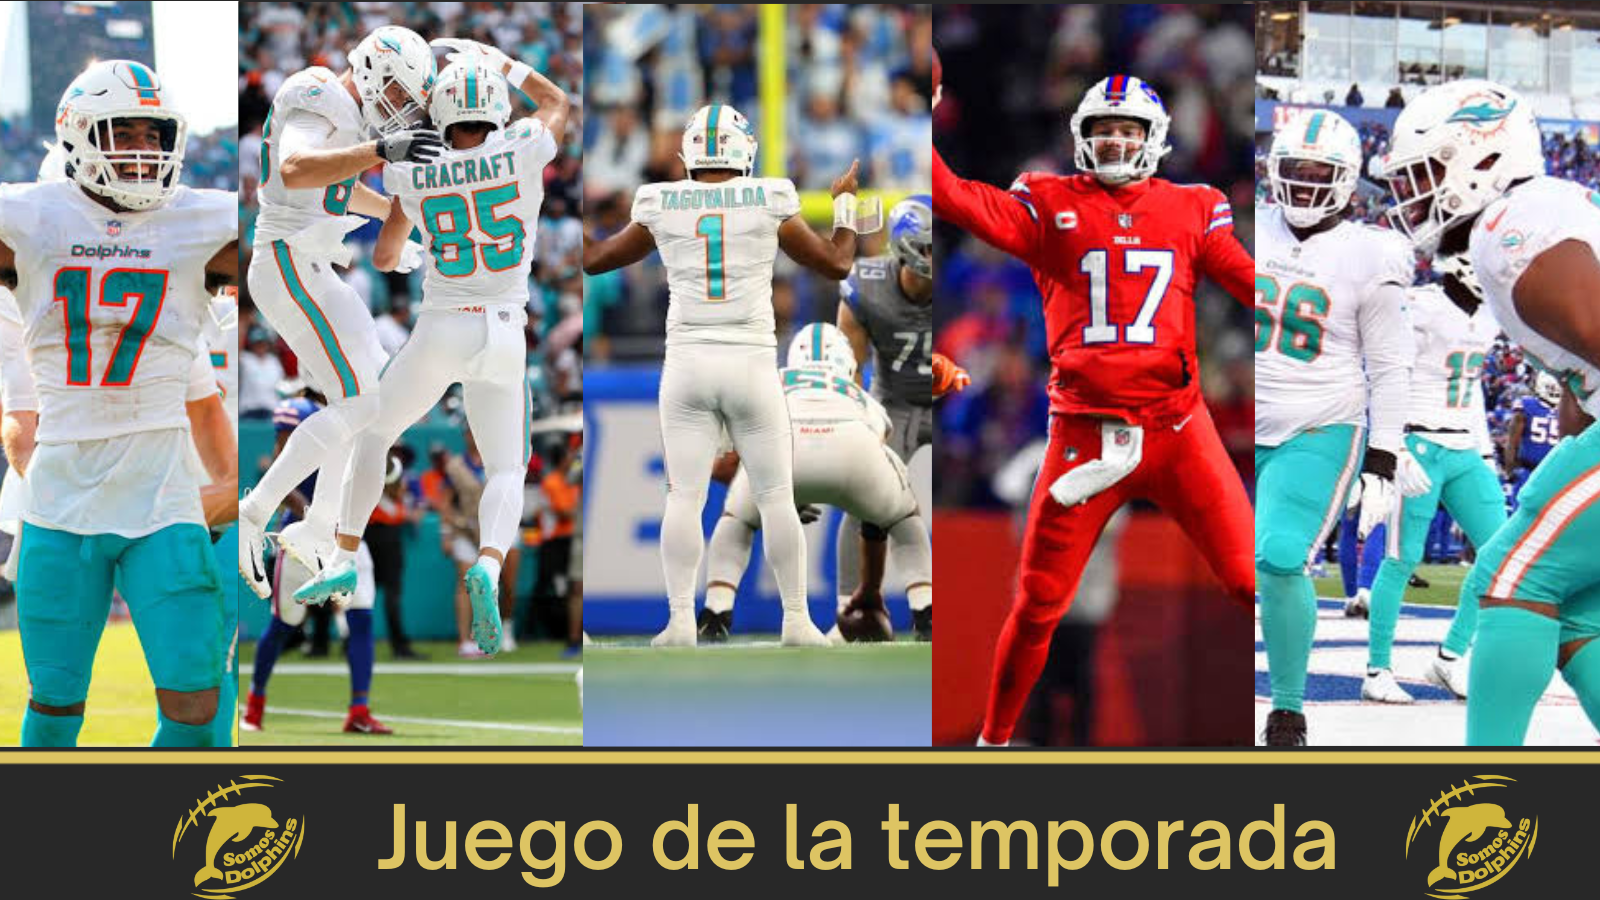 Play of the year Miami Dolphins 2022. Dolphins vs Ravens, Dolphins vs Bills, Dolphins vs Lions, Bills vs Dolphins, Wildcard Game: Bills vs Dolphins 